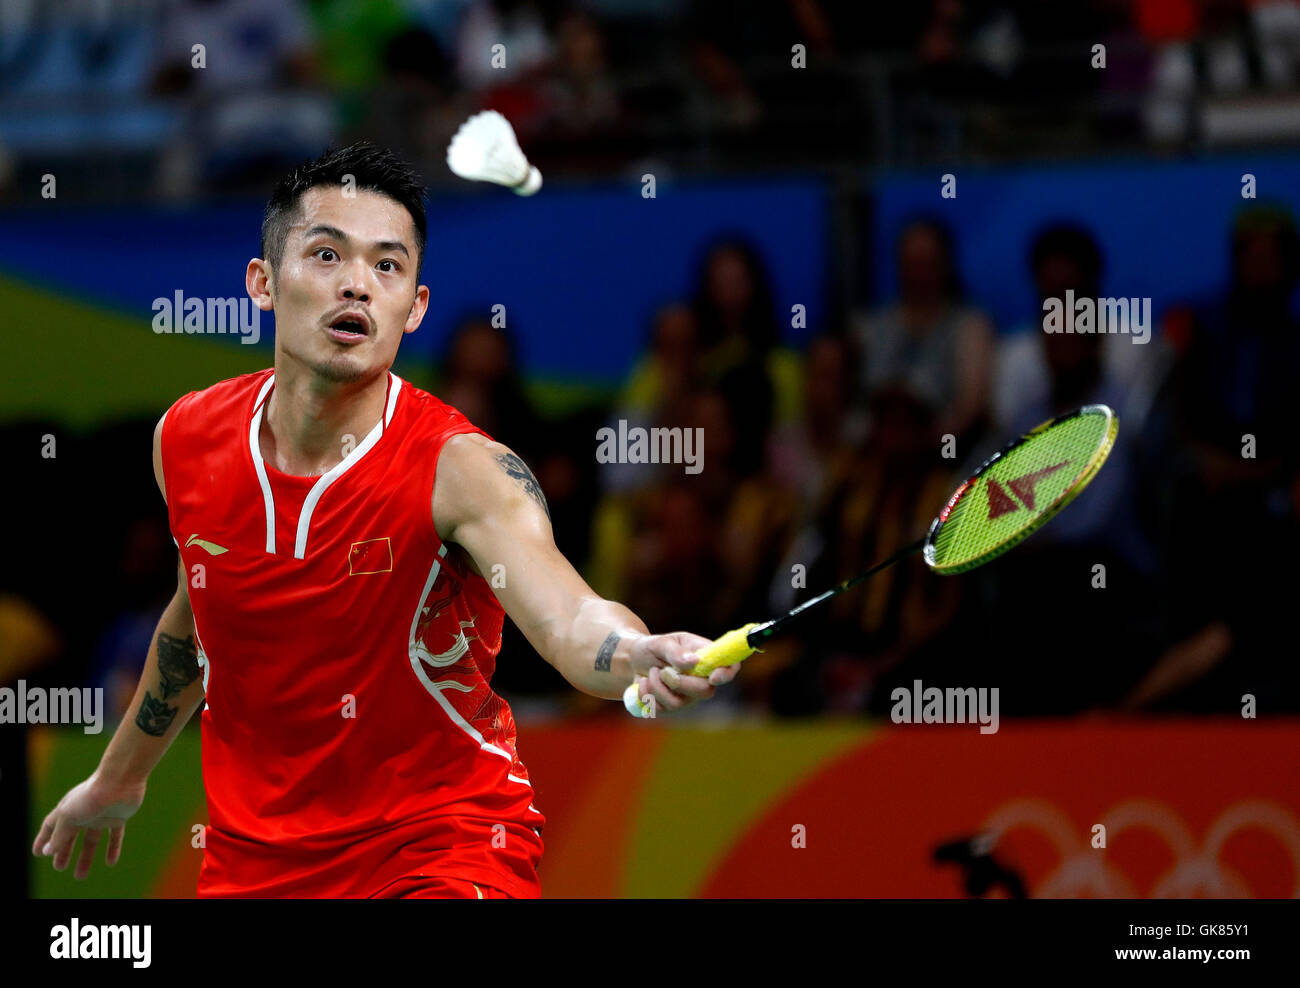 Rio de Janeiro, Brazil. 19th August, 2016. OLYMPICS 2016 BADMINTON - Dan LIN China (CHI) faces Lee Chong Wei of Malaysia (MAS) for the semi-finals of the Badminton 2016 Olympics held in Hall 4 Riocentro. Credit:  Foto Arena LTDA/Alamy Live News Stock Photo